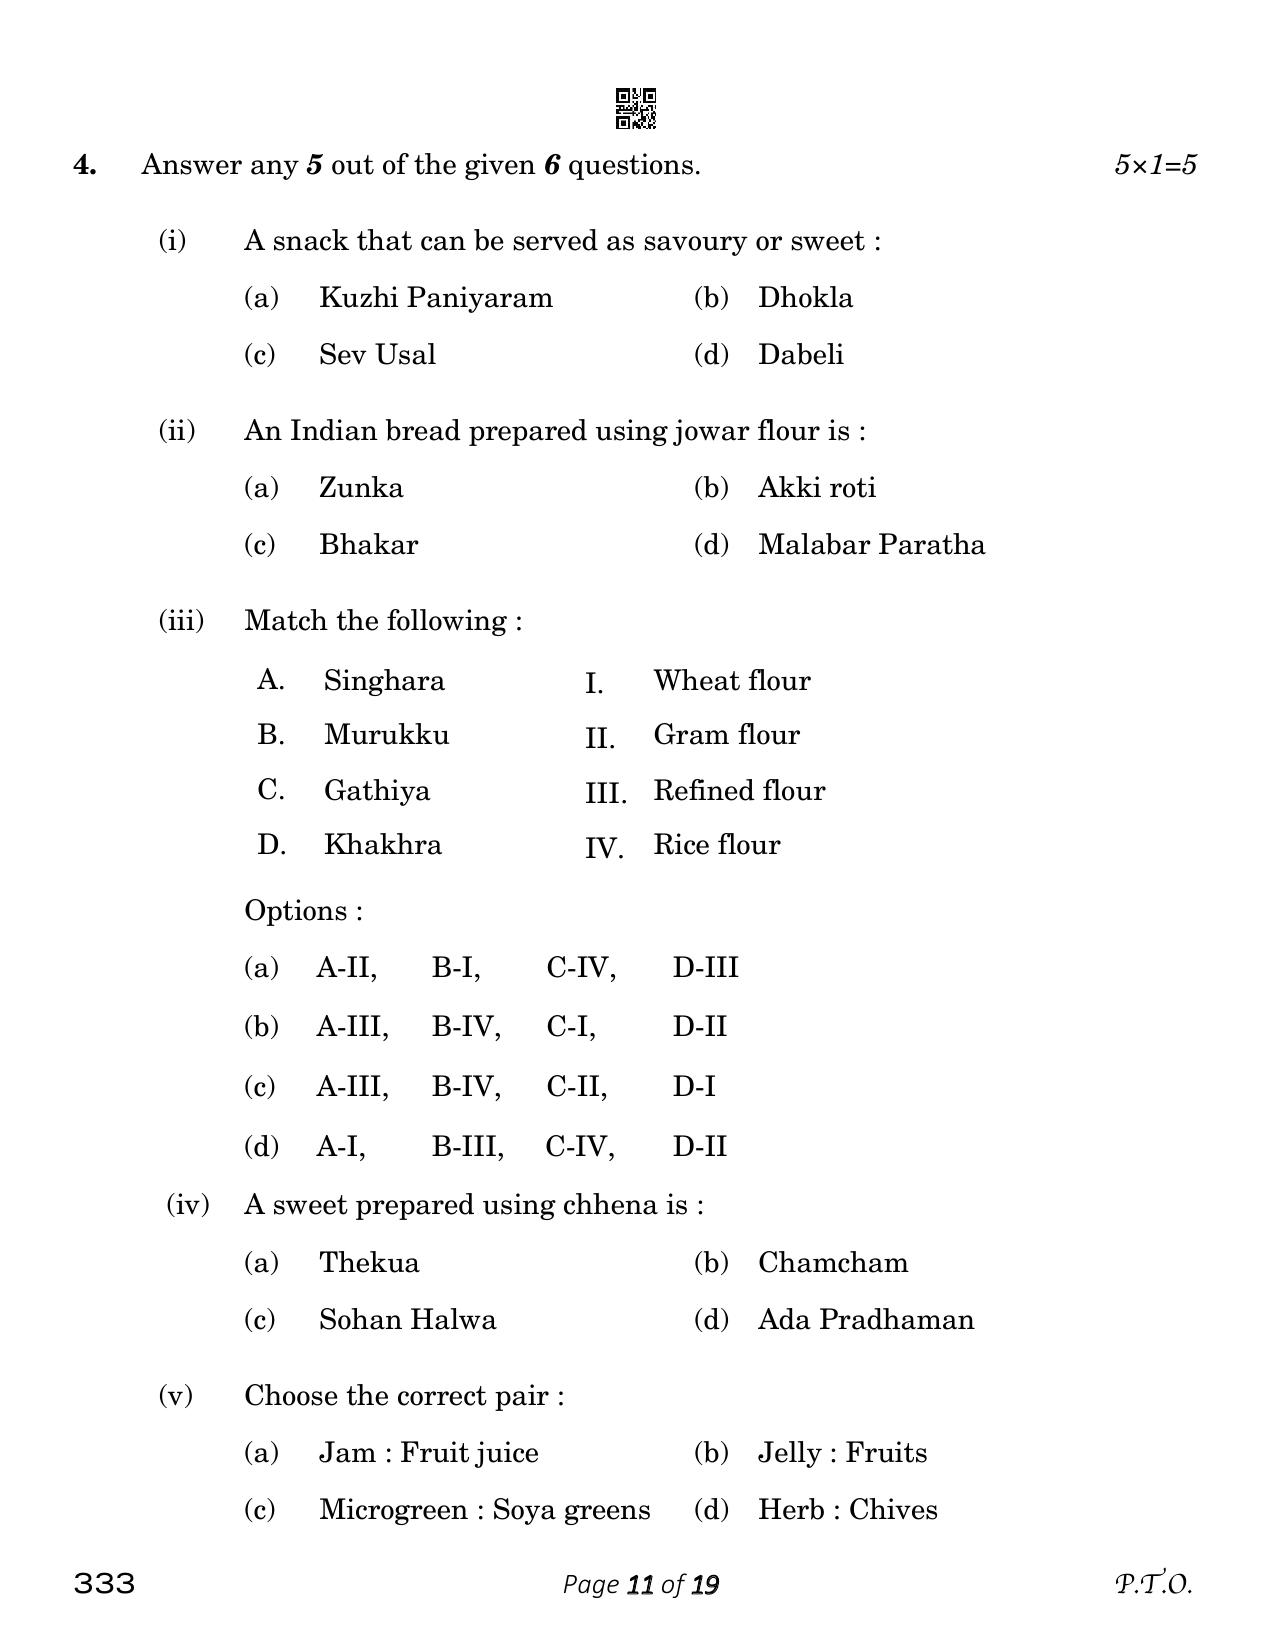 CBSE Class 12 food Production (Compartment) 2023 Question Paper - Page 11